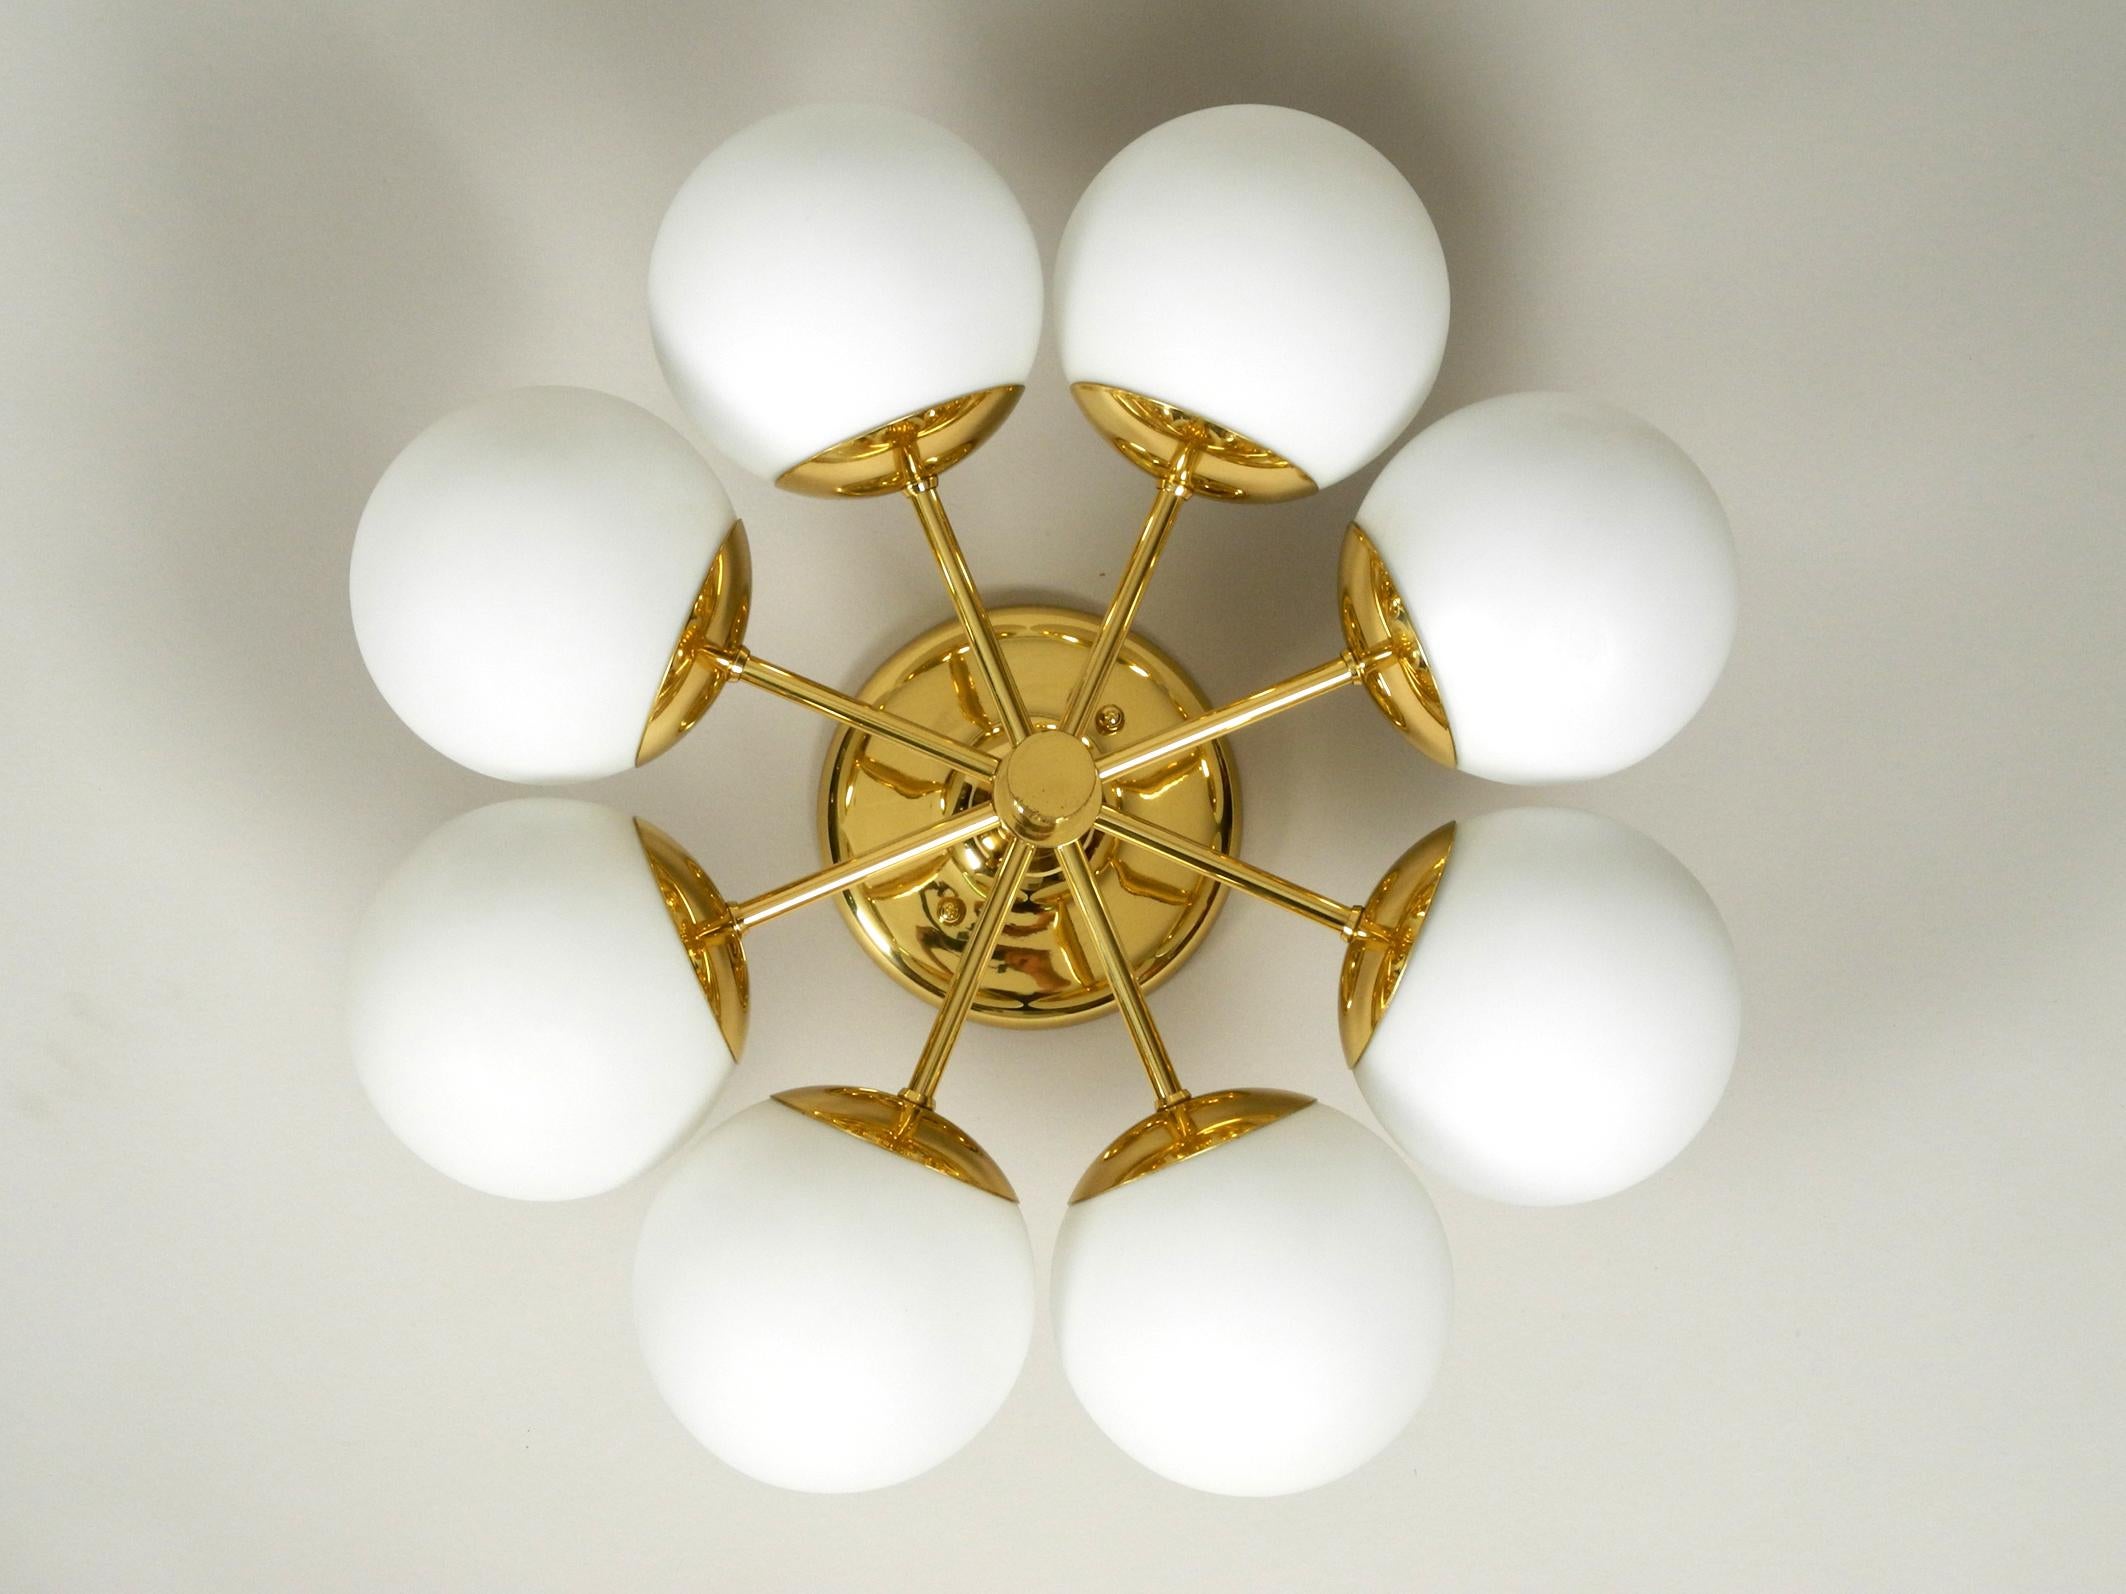 Beautiful 1960s brass ceiling lamp with 8 white opal glass balls.
The manufacturer is Kaiser Leuchten. Made in Germany.
Great 1960s space age atomic design.
Very good vintage condition. Hardly visible signs of use.
The high-glossy brass frame is